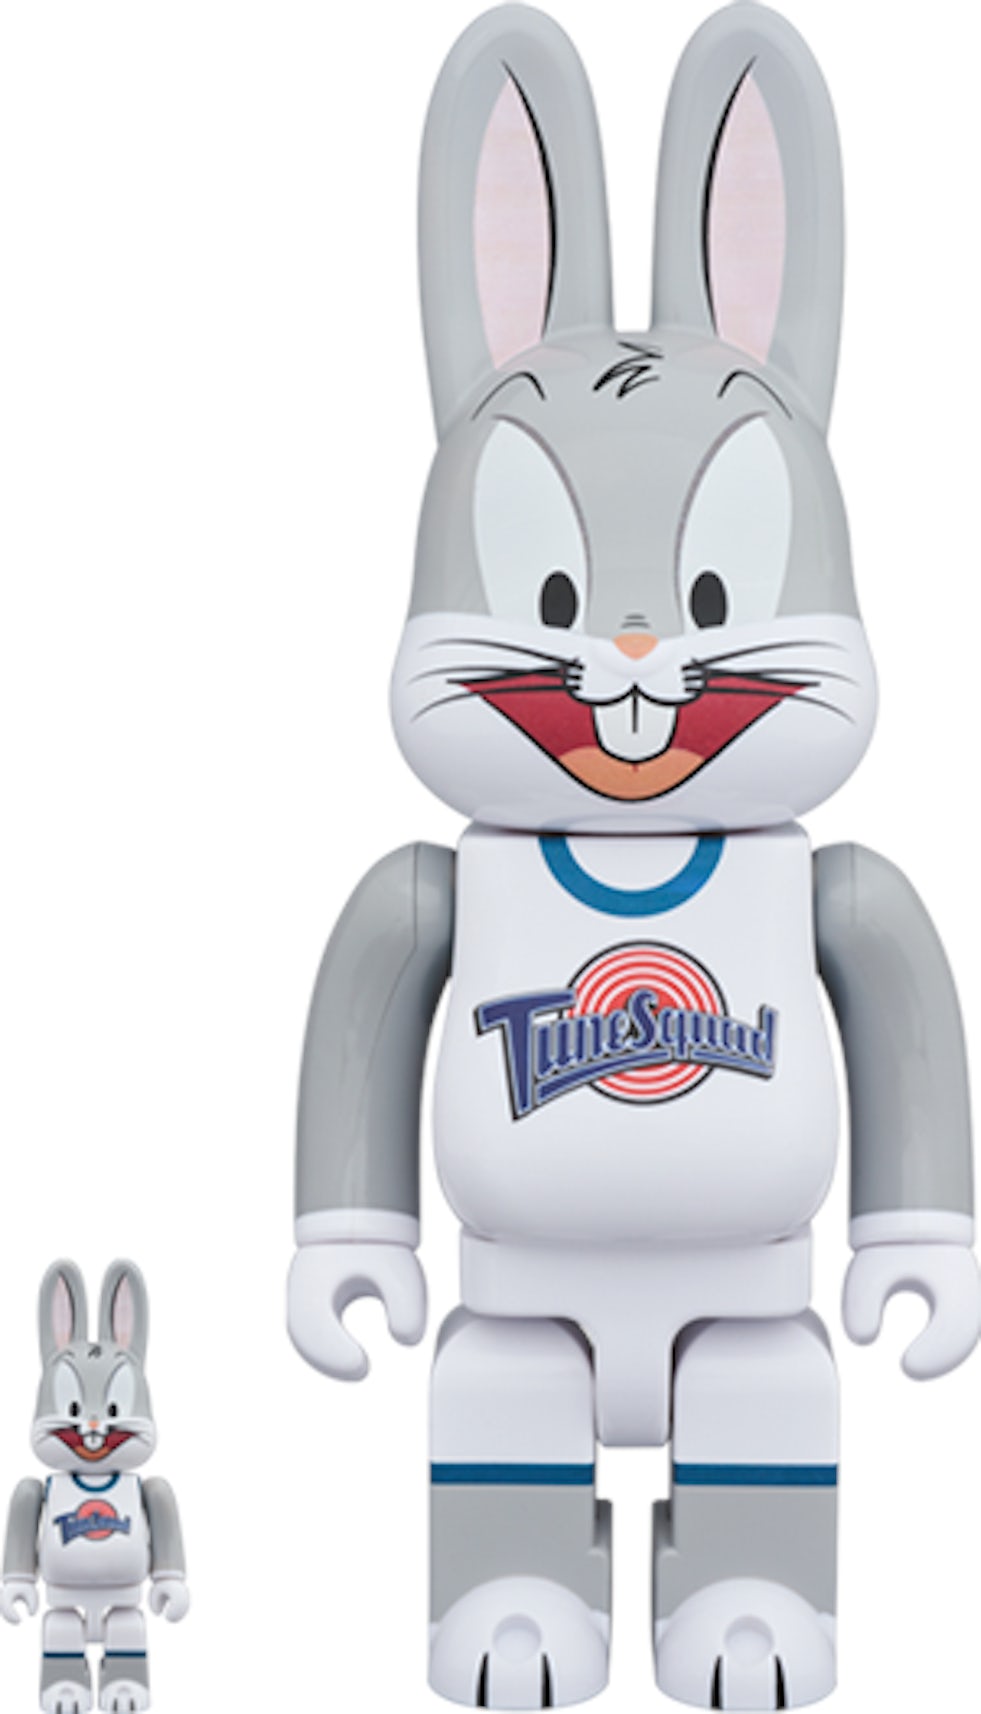 Life Size Bugs Bunny (Space Jam A New Legacy)